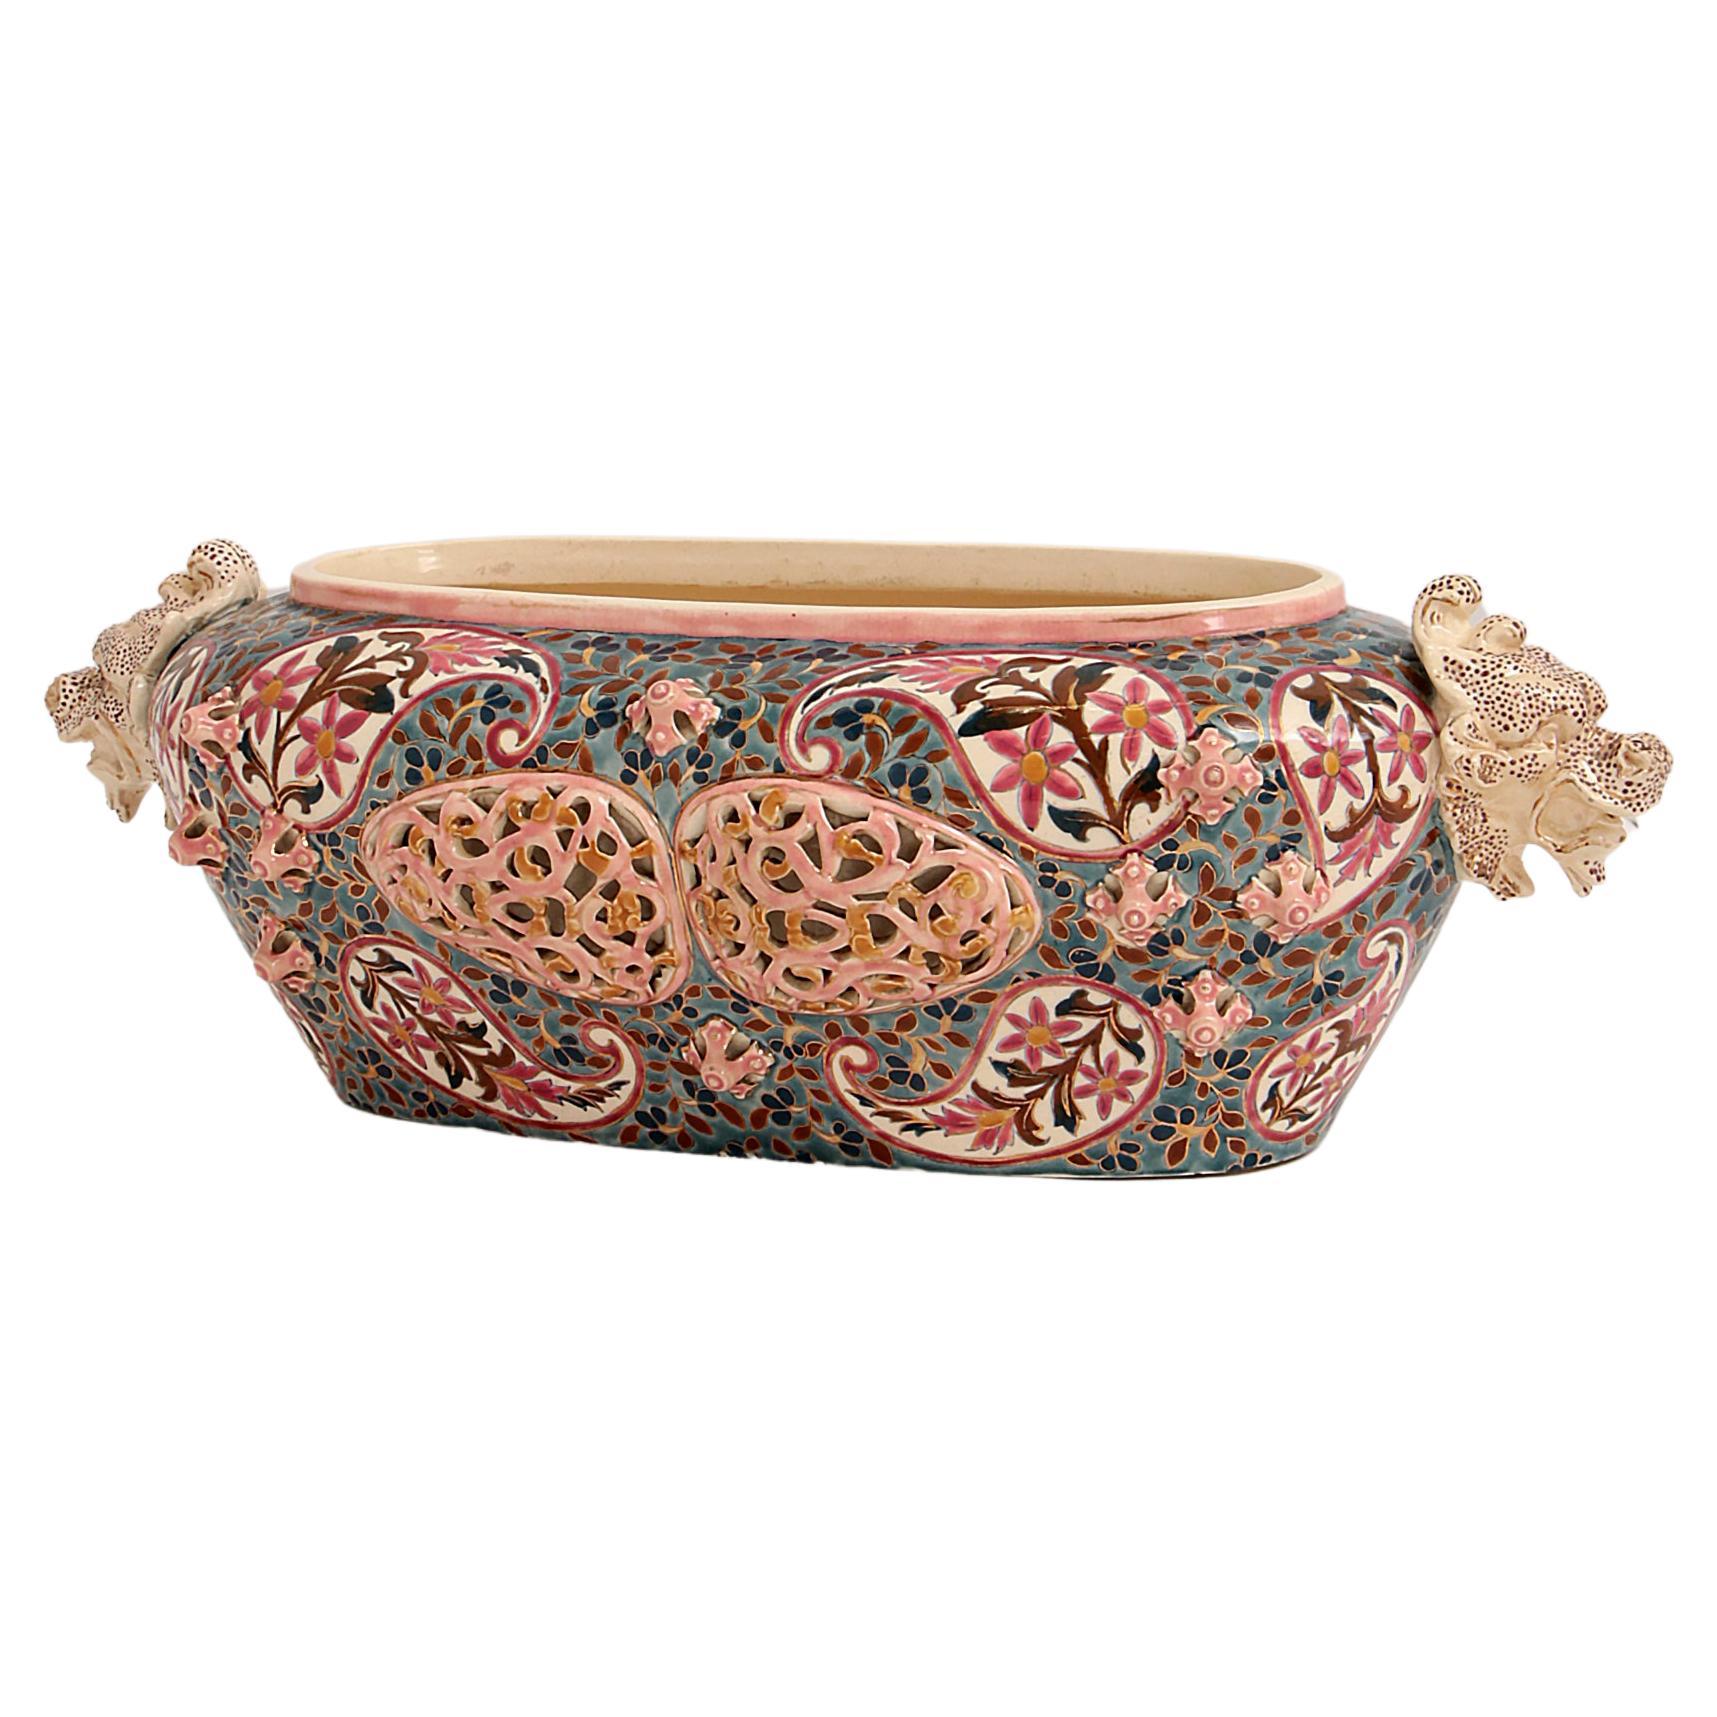 Fischer Budapest Bowl with Beautiful Colors and Dragon Heads, 19th Century